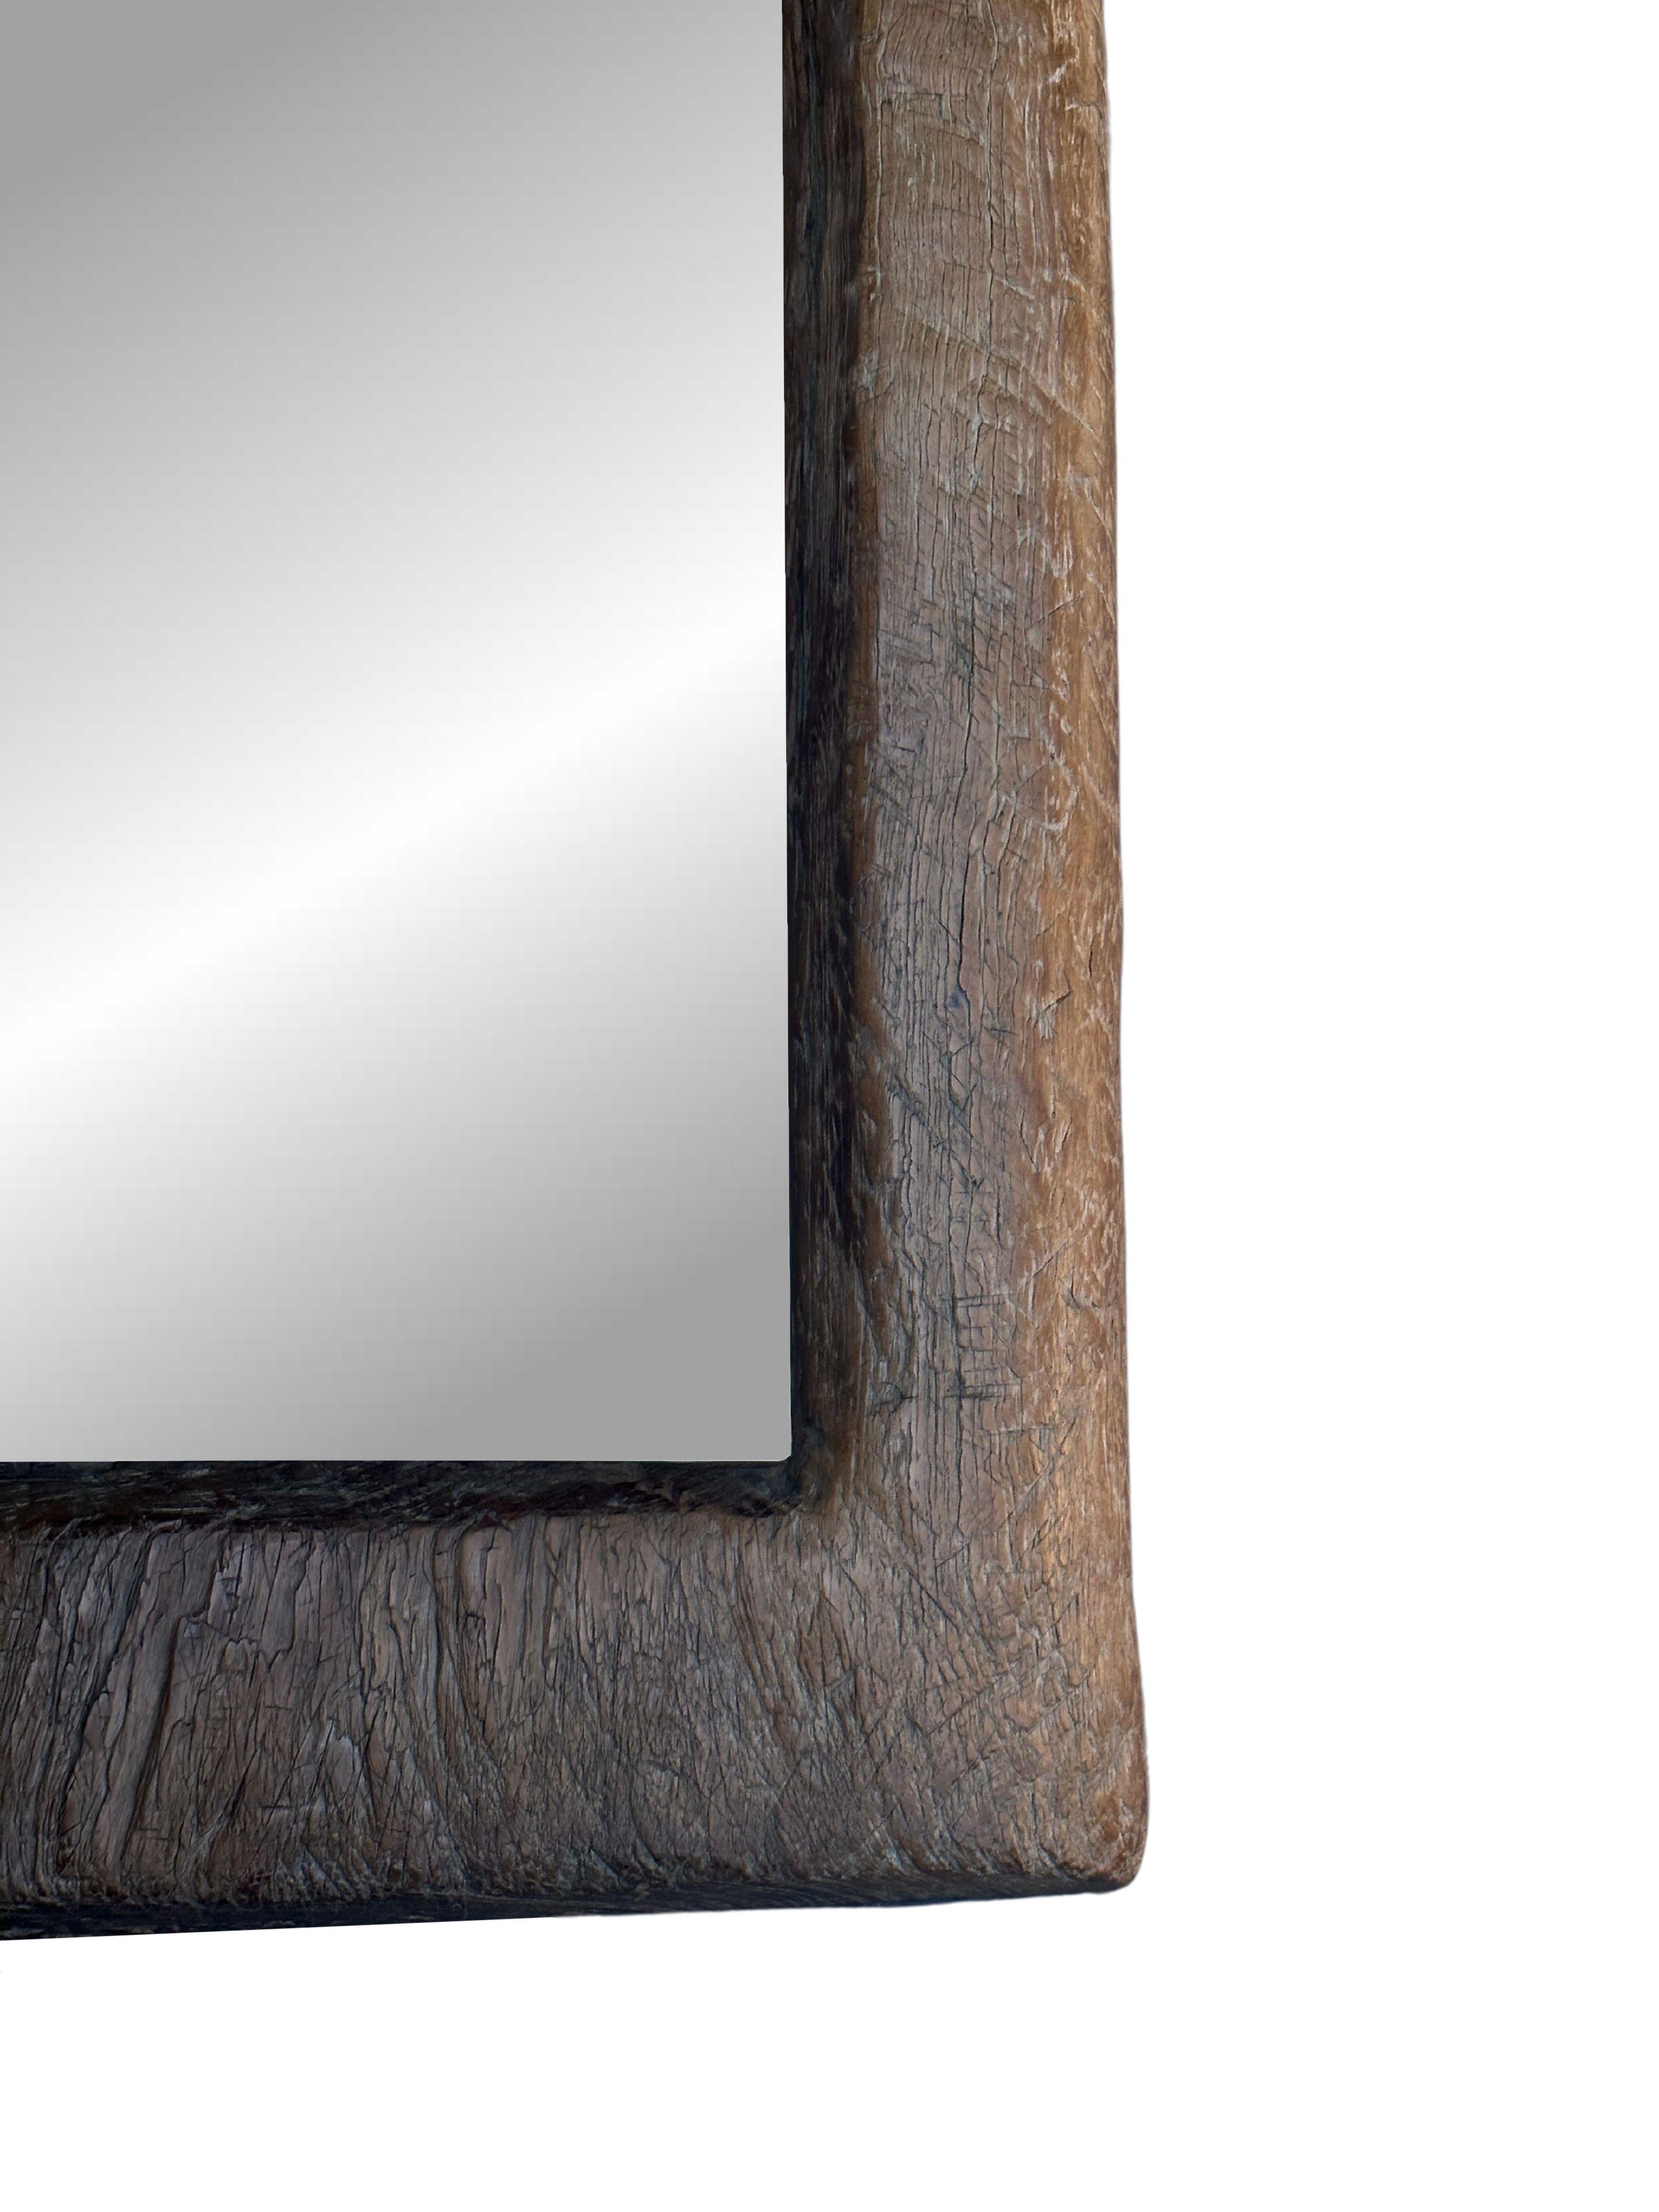 Rustic Teak Wood Mirror With Wonderful Age Related Patina & Markings For Sale 1